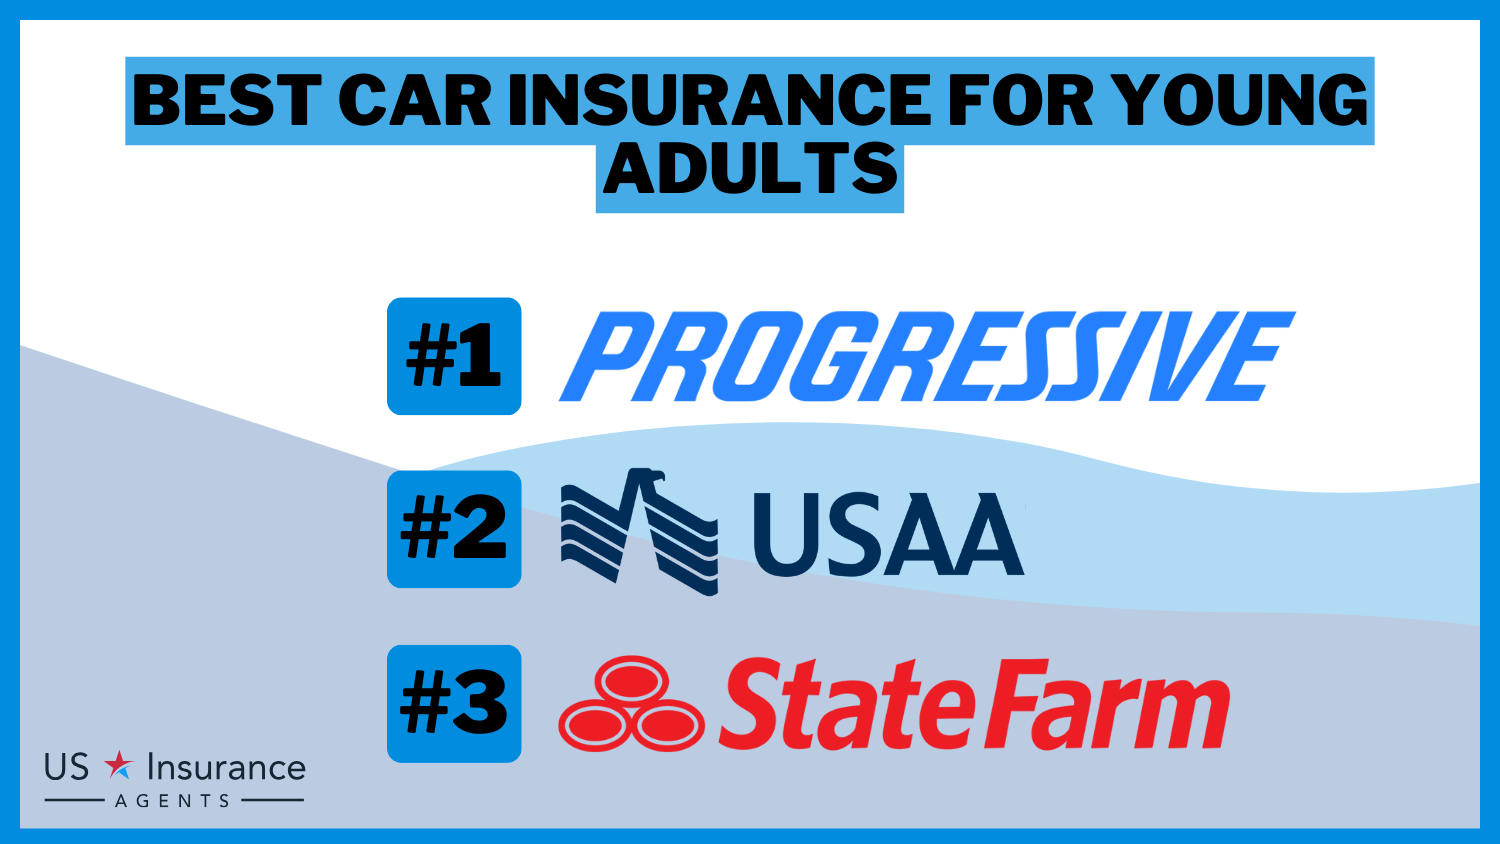 Best Car Insurance for Young Adults: Progressive, USAA and State Farm.